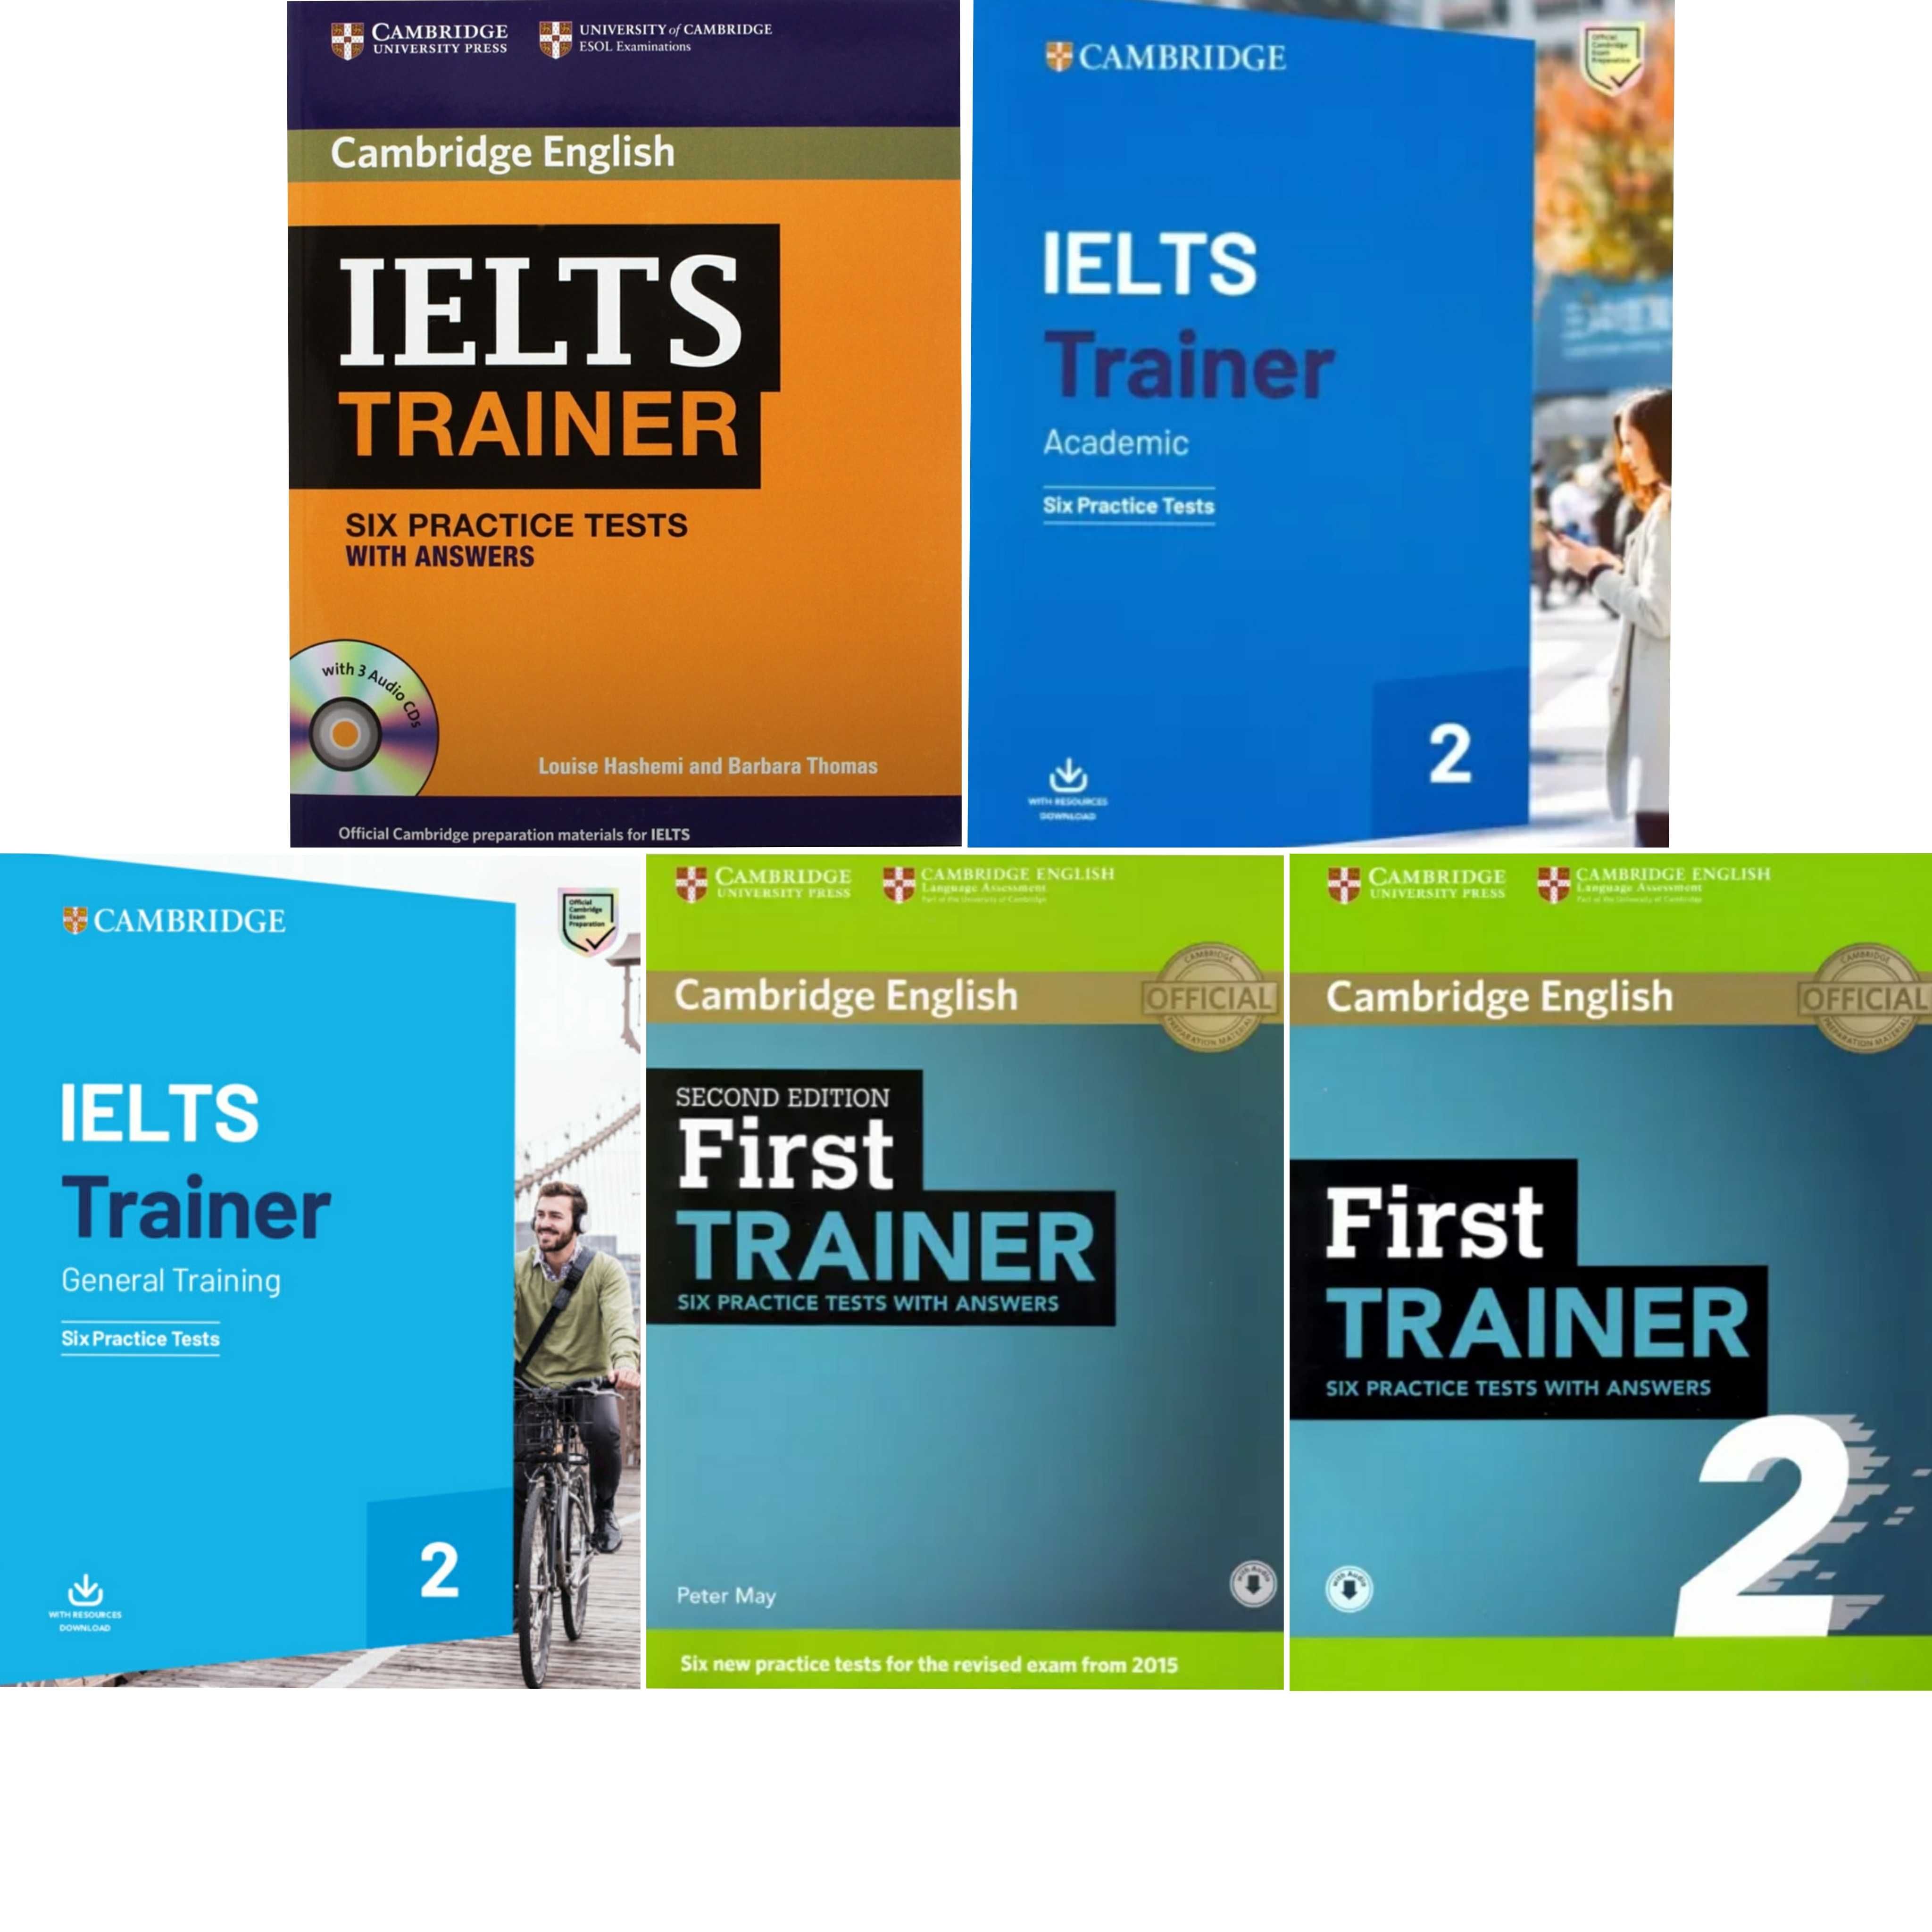 Ielts Trainers six practice tests. First Trainer six practice tests